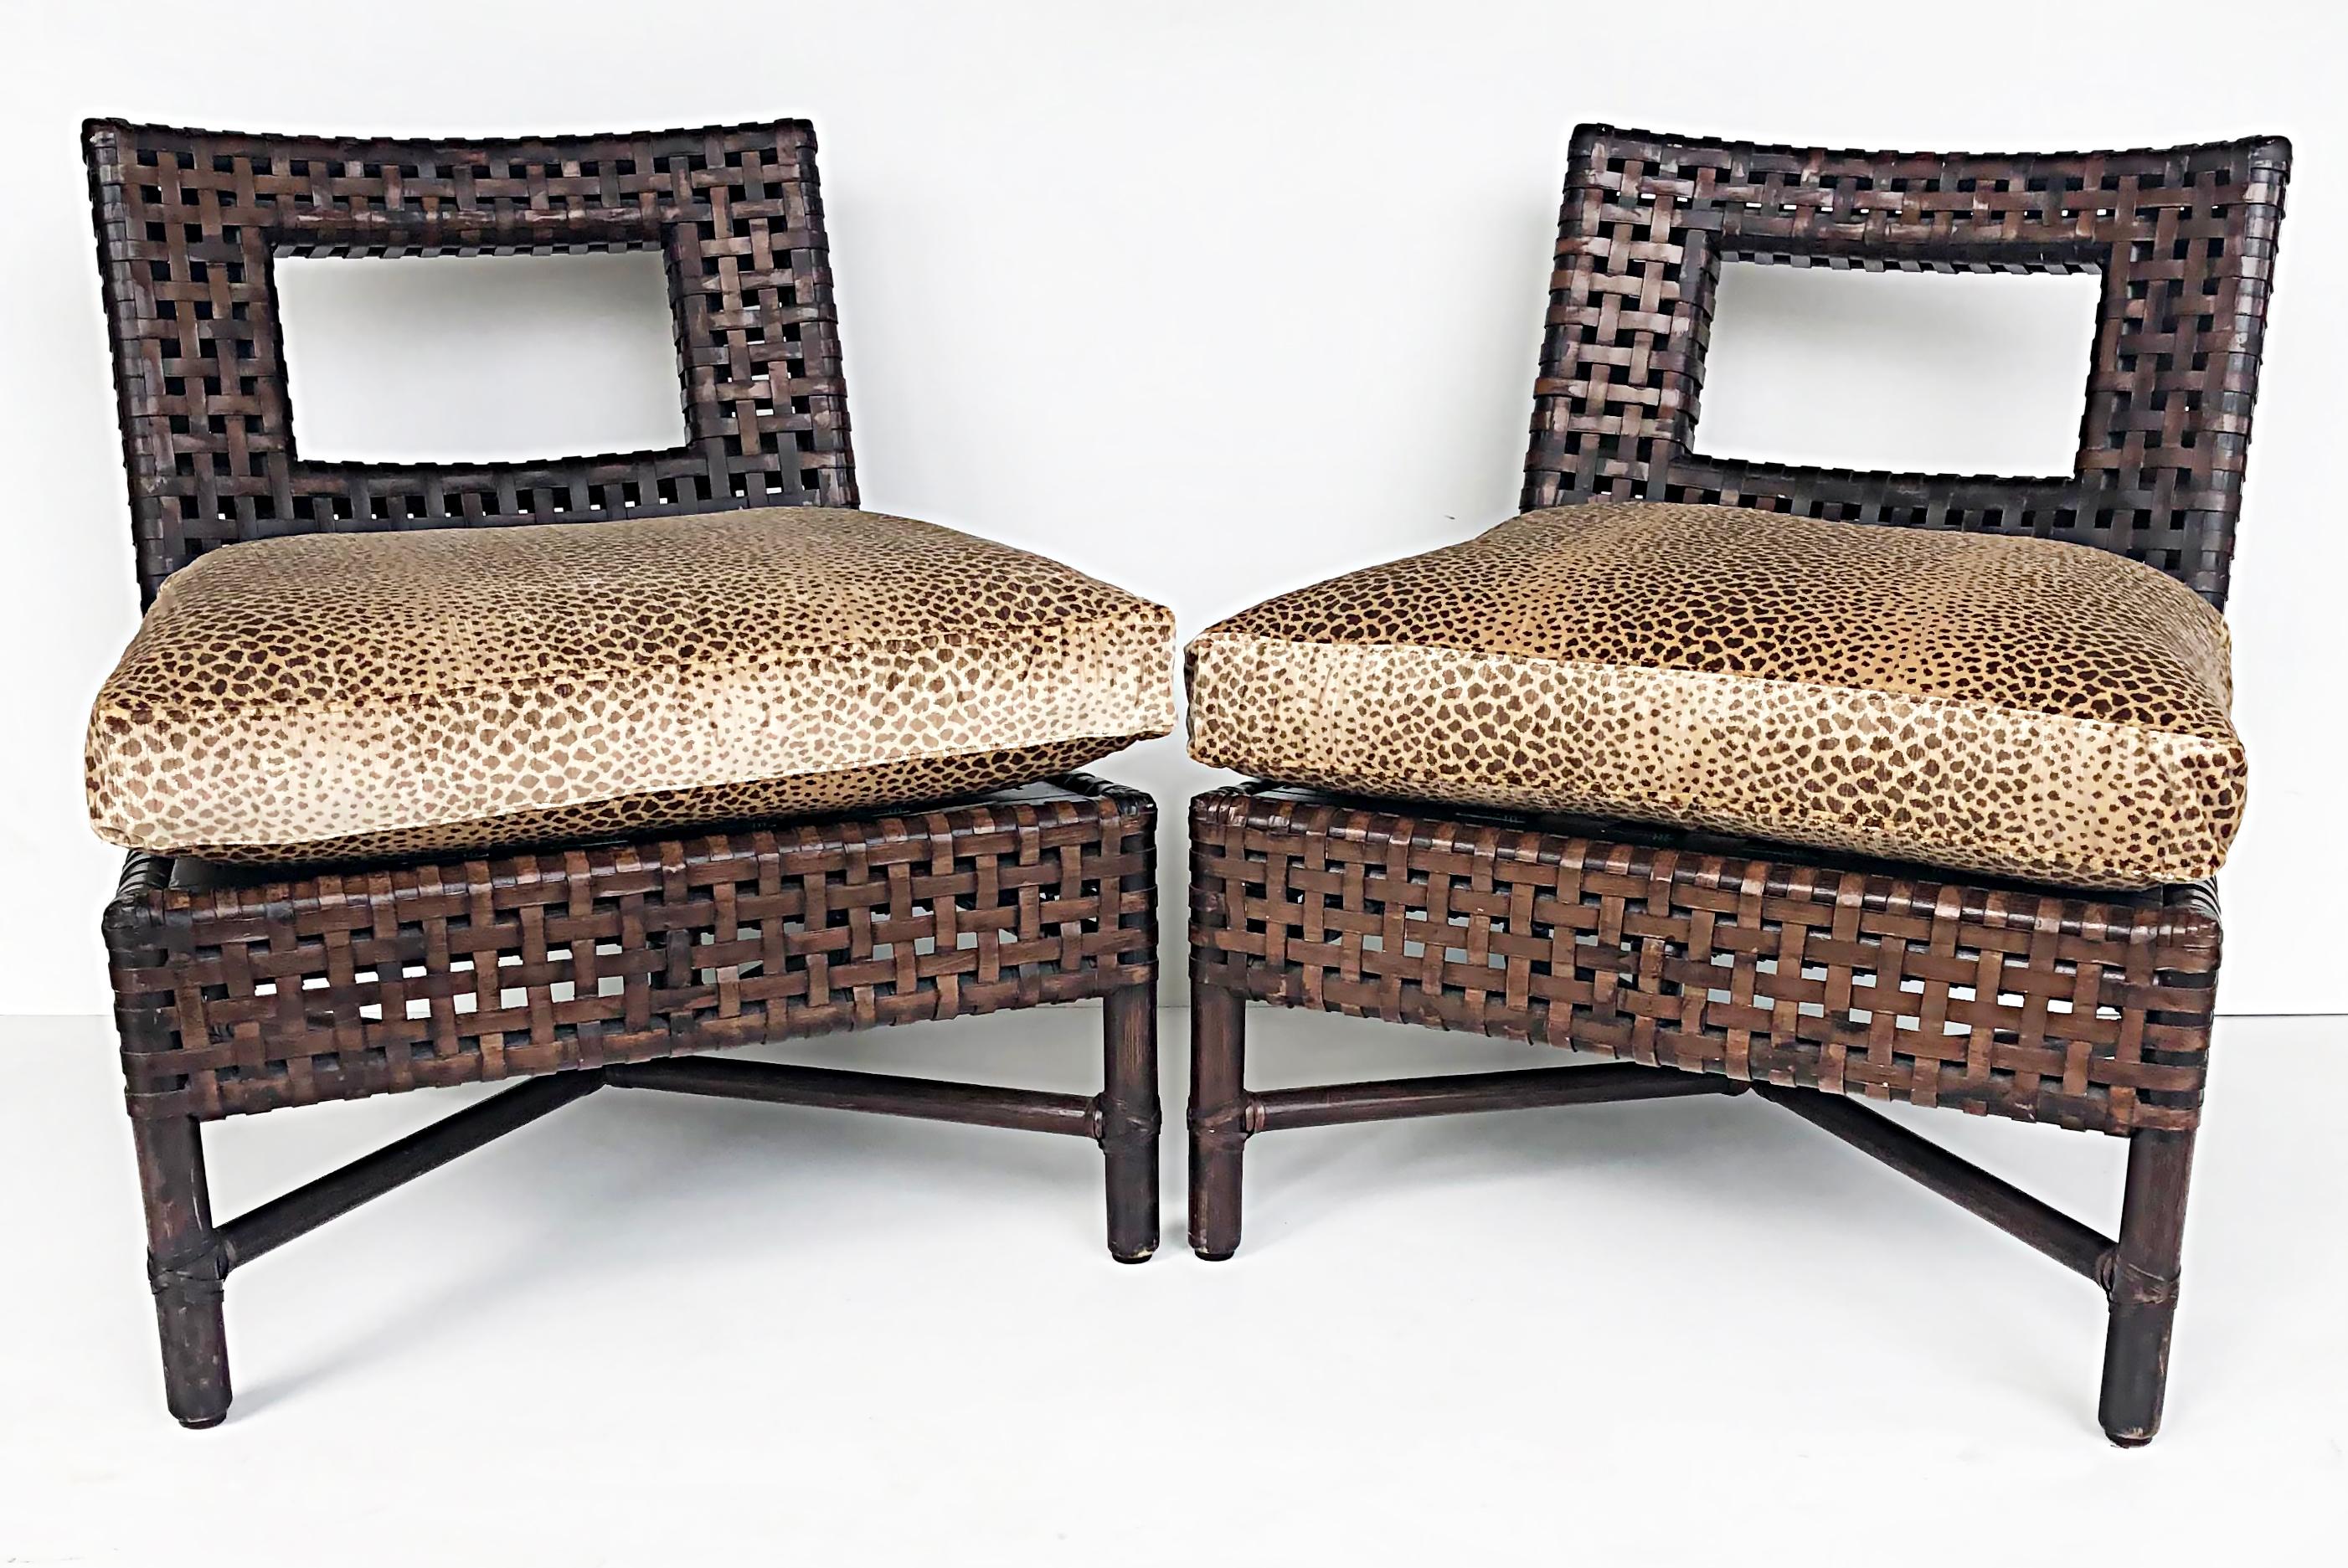 McGuire San Francisco woven leather slipper chairs, upholstered loose cushions

Offered for sale is a pair of rare McGuire of San Francisco woven leather chairs with loose upholstered seat cushions. These are being sold in 